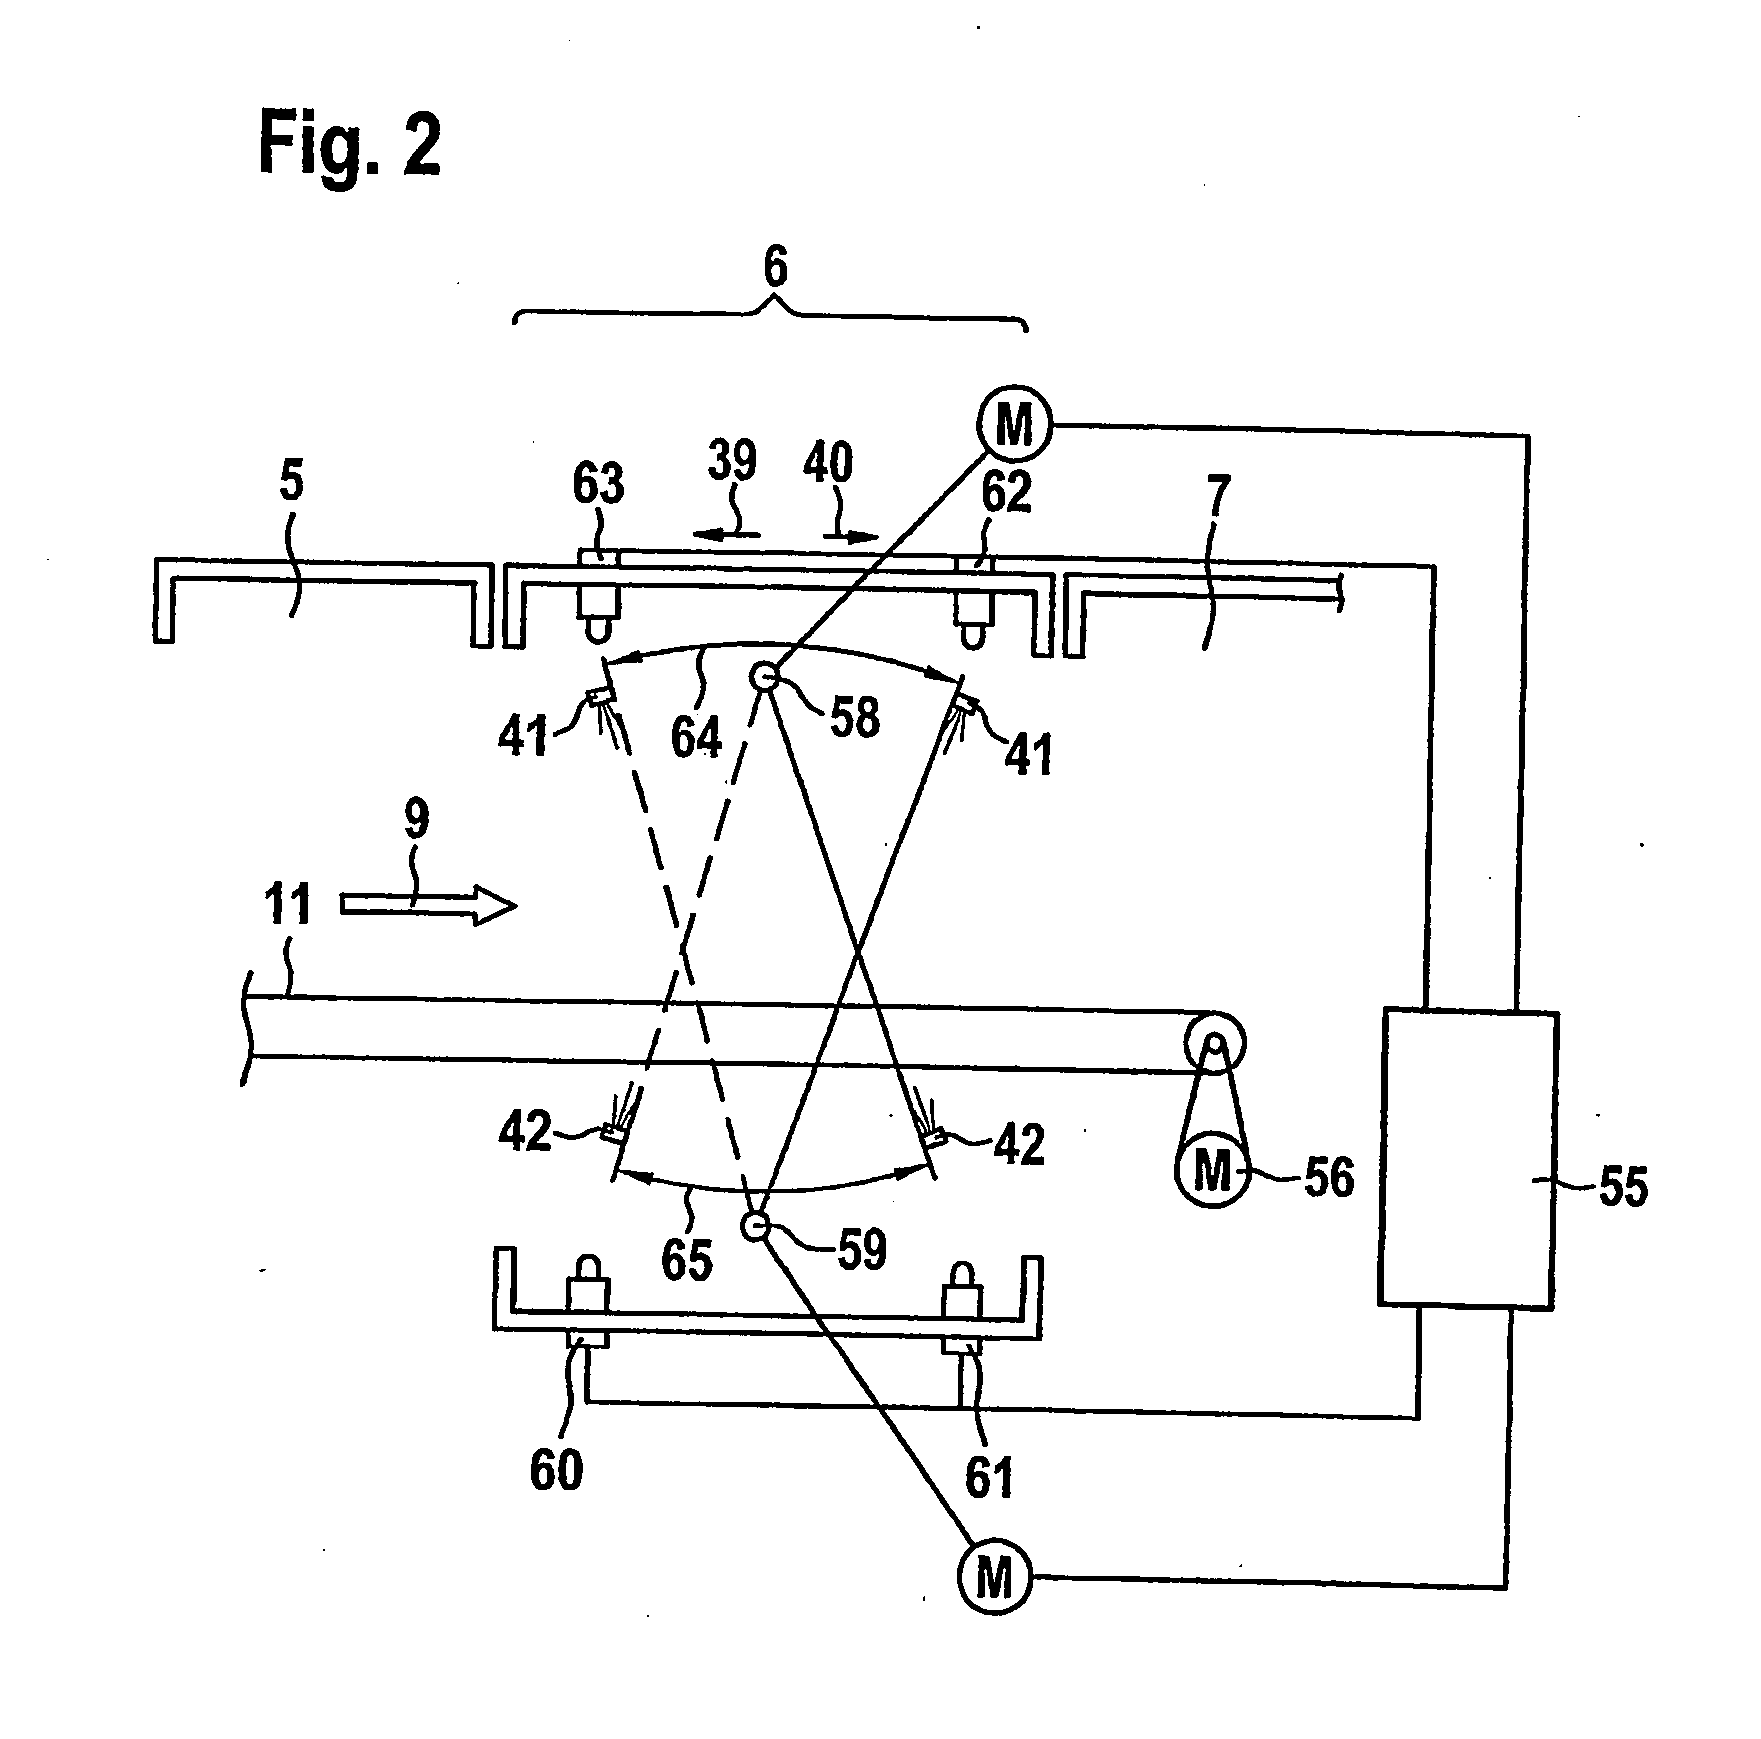 Device for operating a conveying dishwashing machine